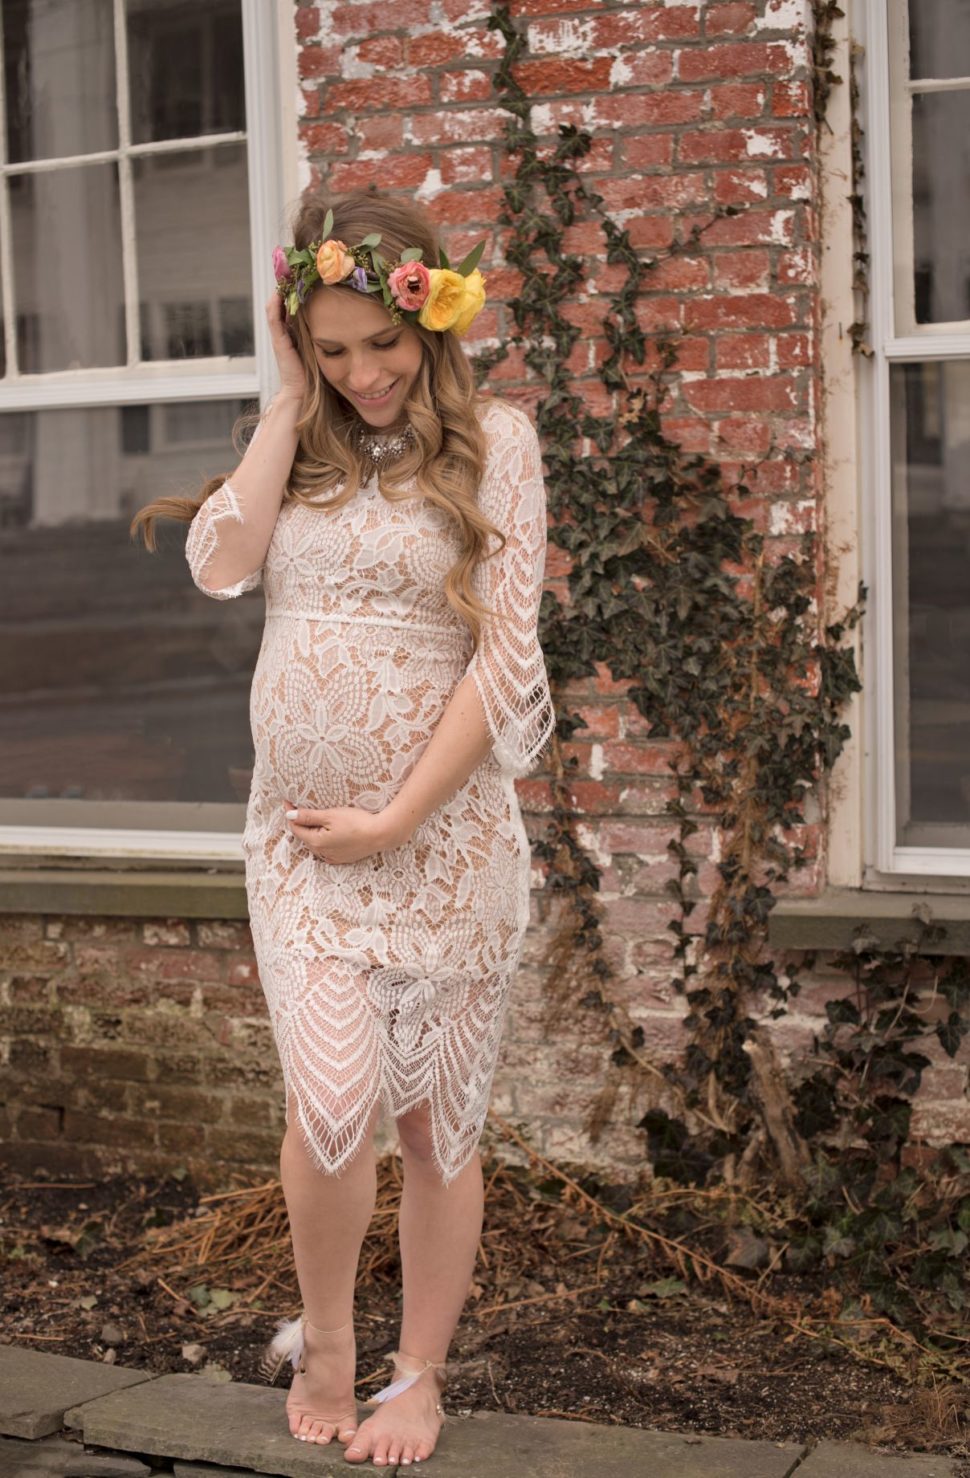 Medium Size of Baby Shower:maternity Clothes H&m Showing Lsi Keywords For Baby Shower Dresses Maternity Evening Gowns Non Maternity Dresses For Baby Shower Baby Shower Dresses Cute Inexpensive Maternity Clothes Maternity Evening Gowns Plus Size Maternity Dresses For Baby Shower